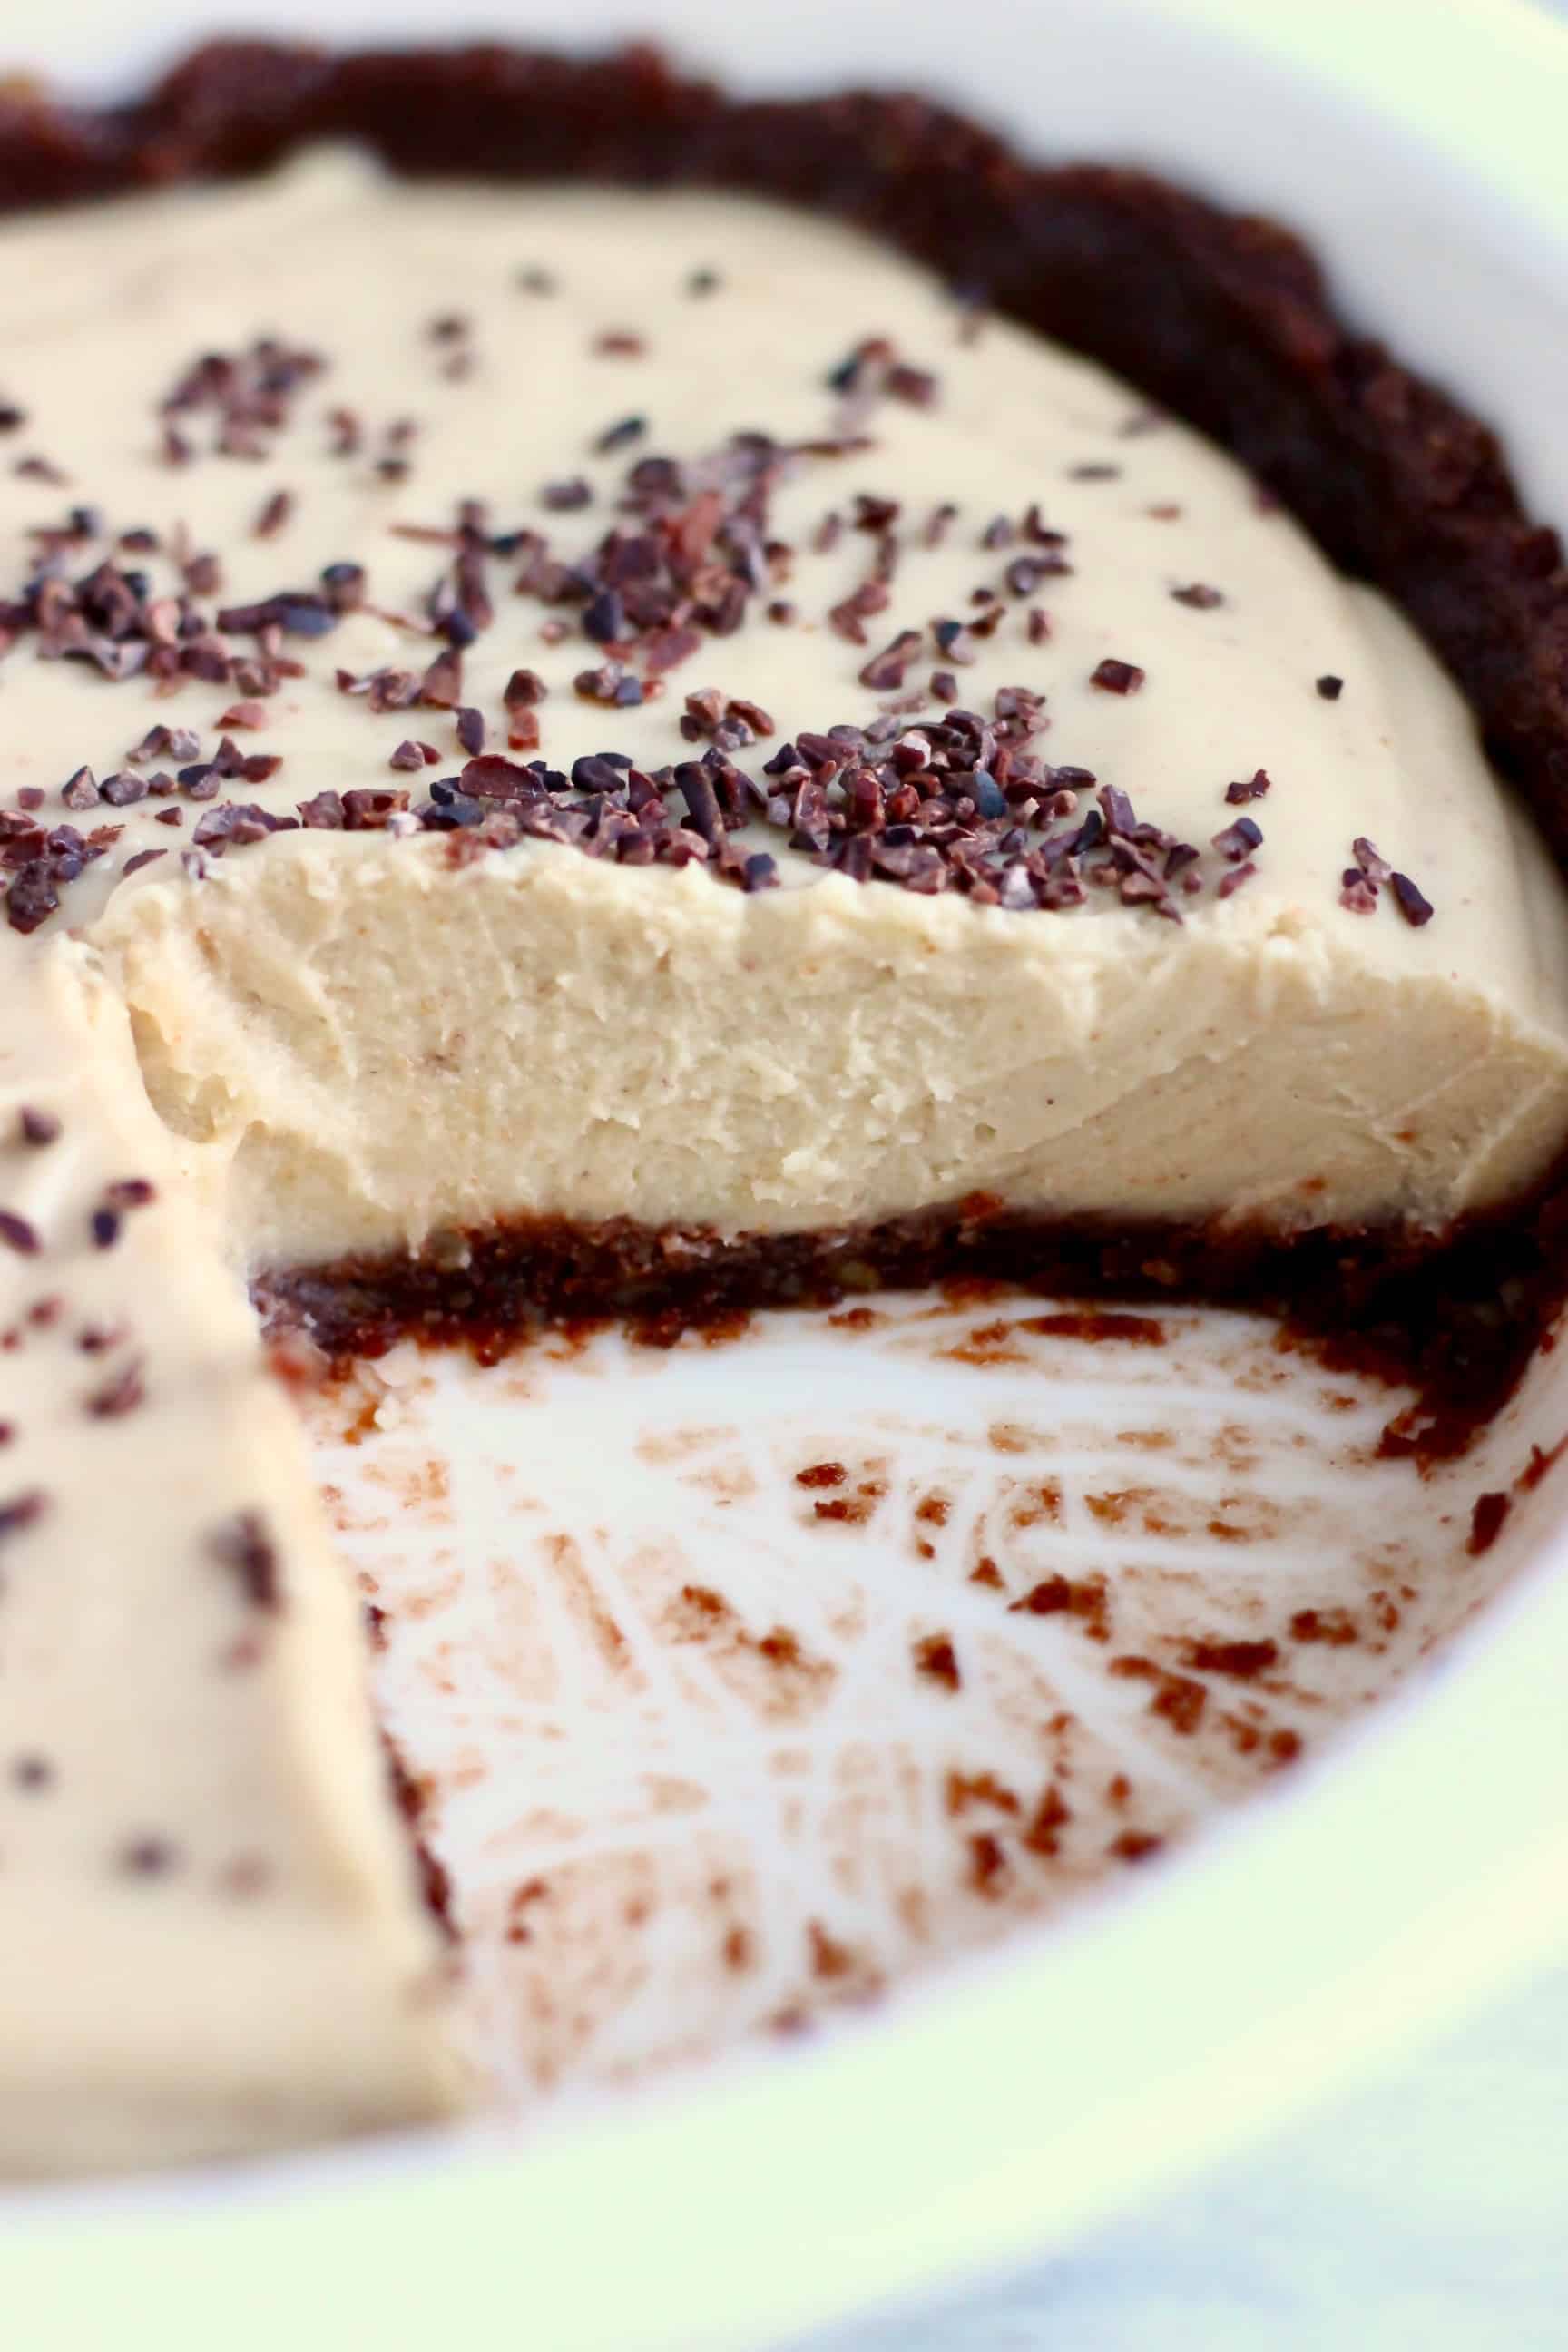 A sliced peanut butter pie in a white pie dish - a brown chocolate crust with a light brown filling and sprinkled with cacao nibs